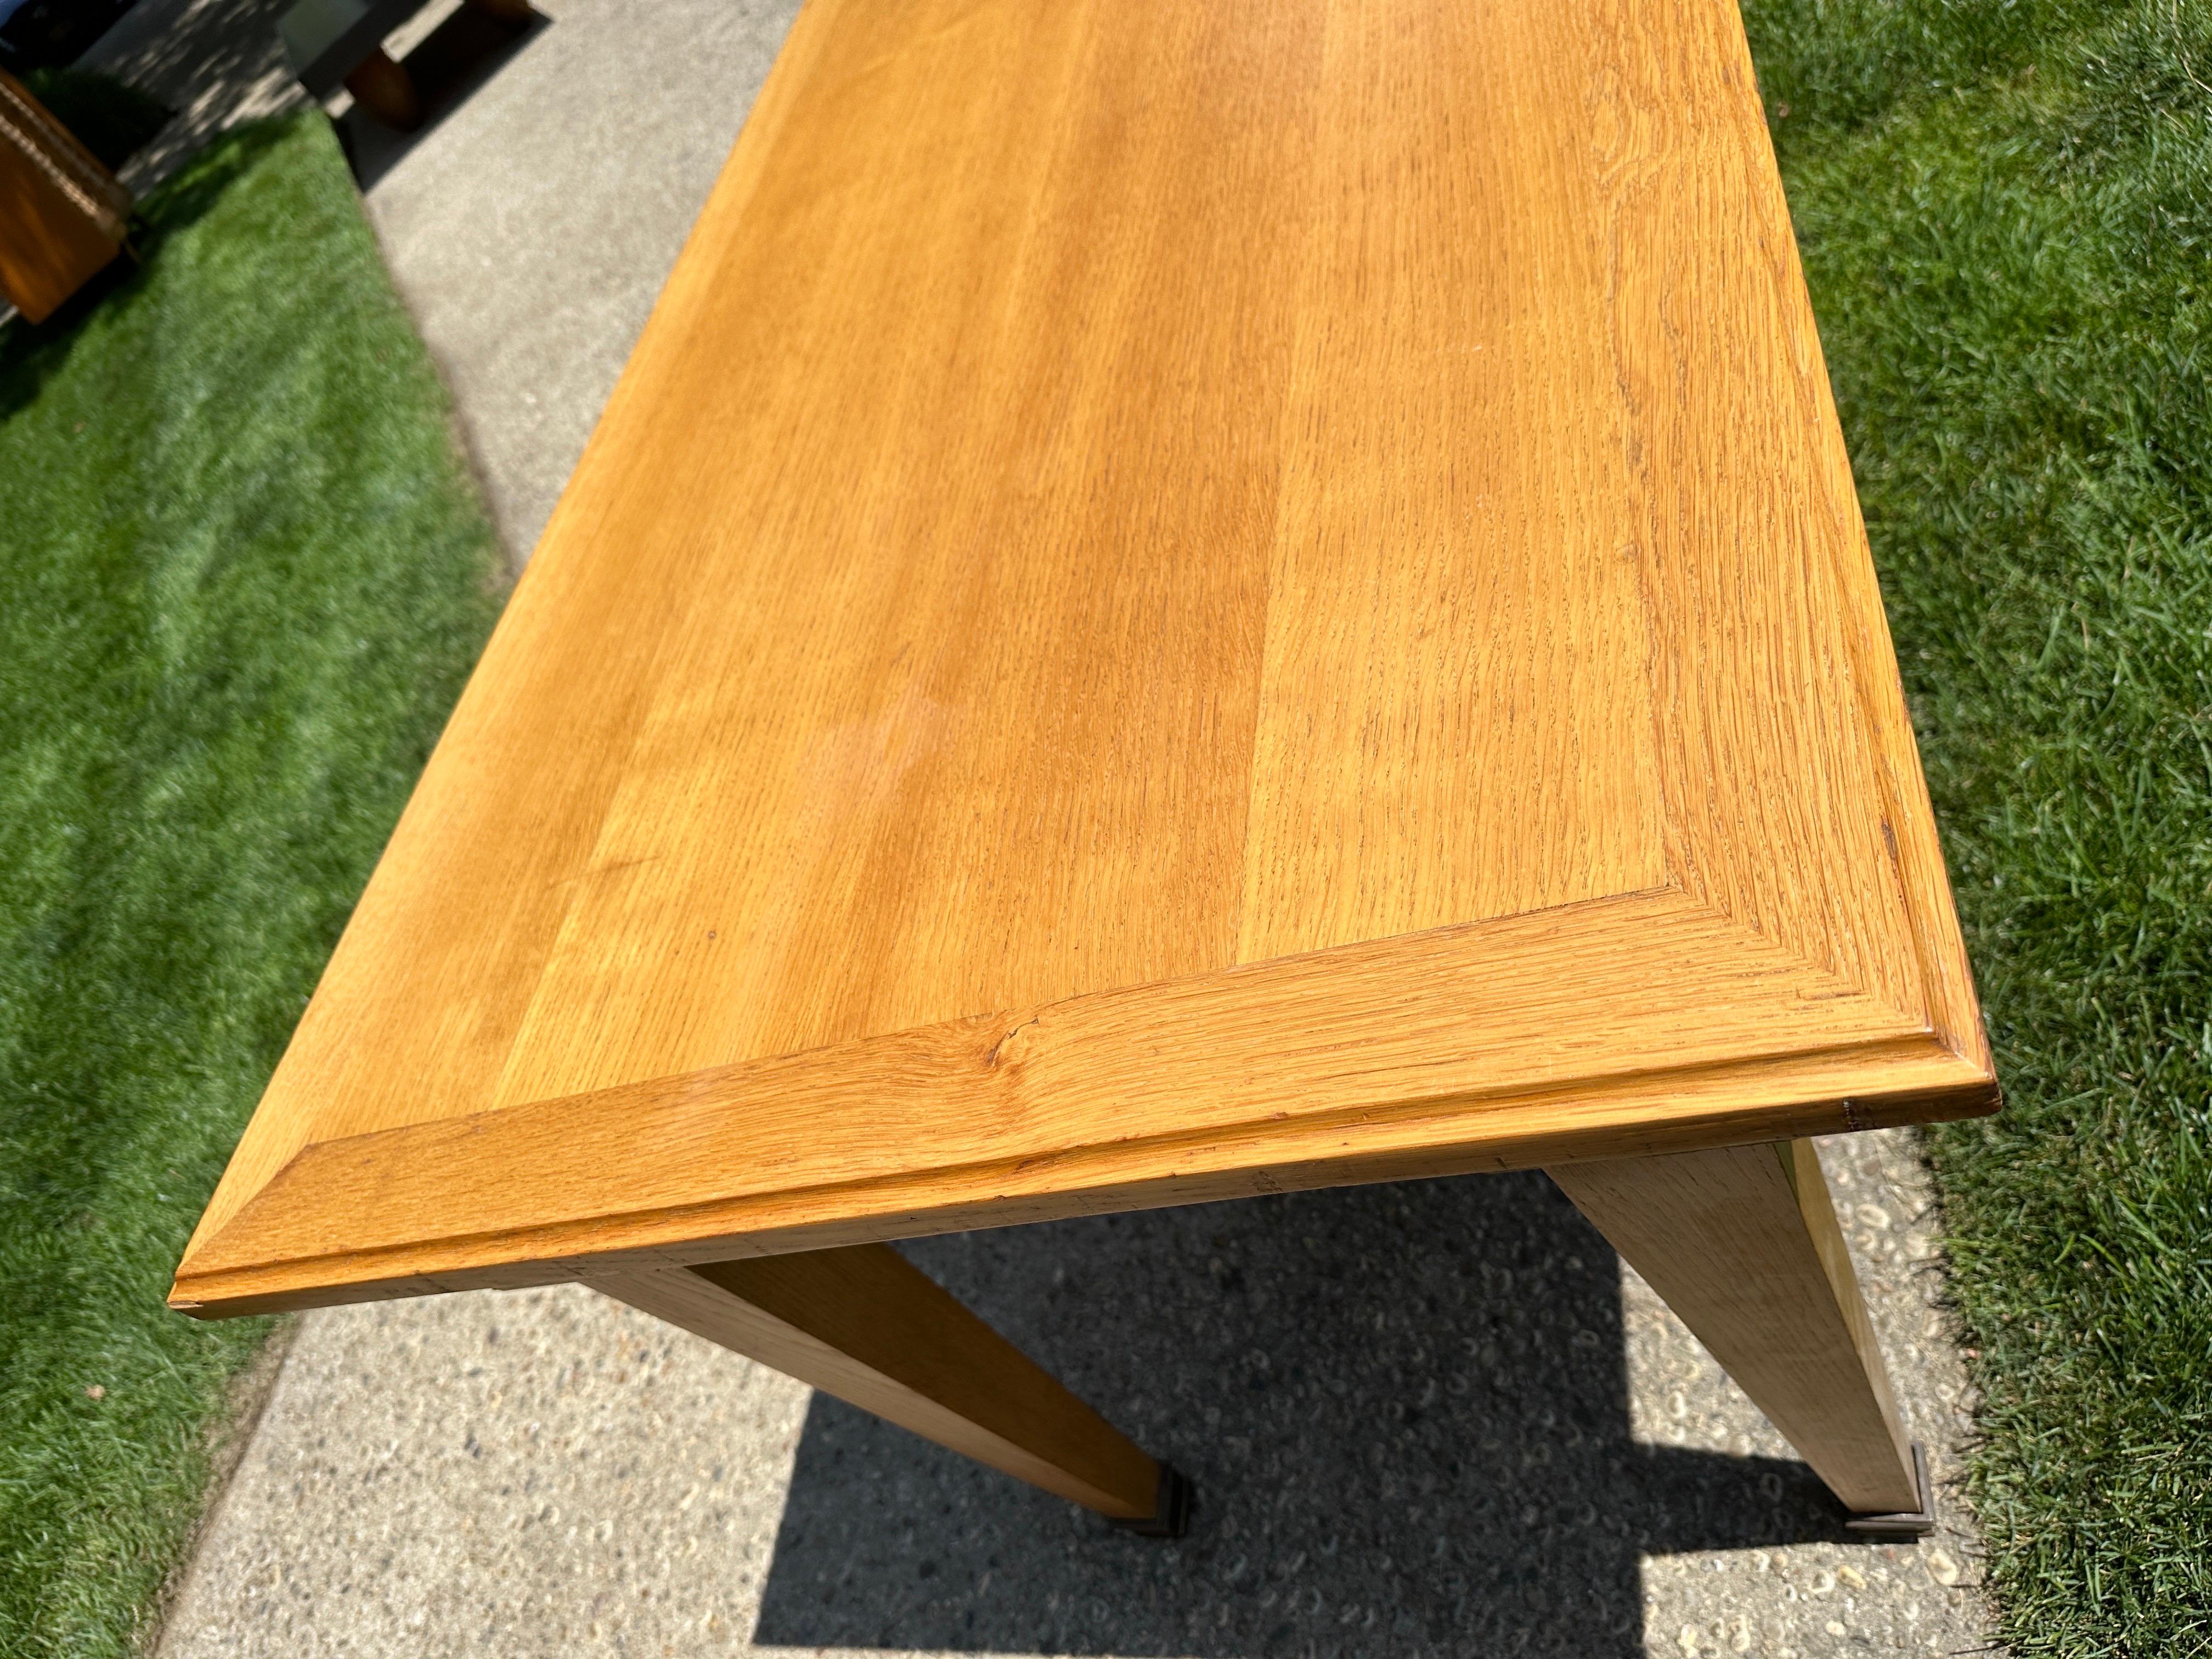 This long and narrow oak table with brass accent sabots shows a beautiful age and patina from mild use.   THIS ITEM IS LOCATED AND WILL SHIP FROM OUR EAST HAMPTON, NY SHOWROOM.